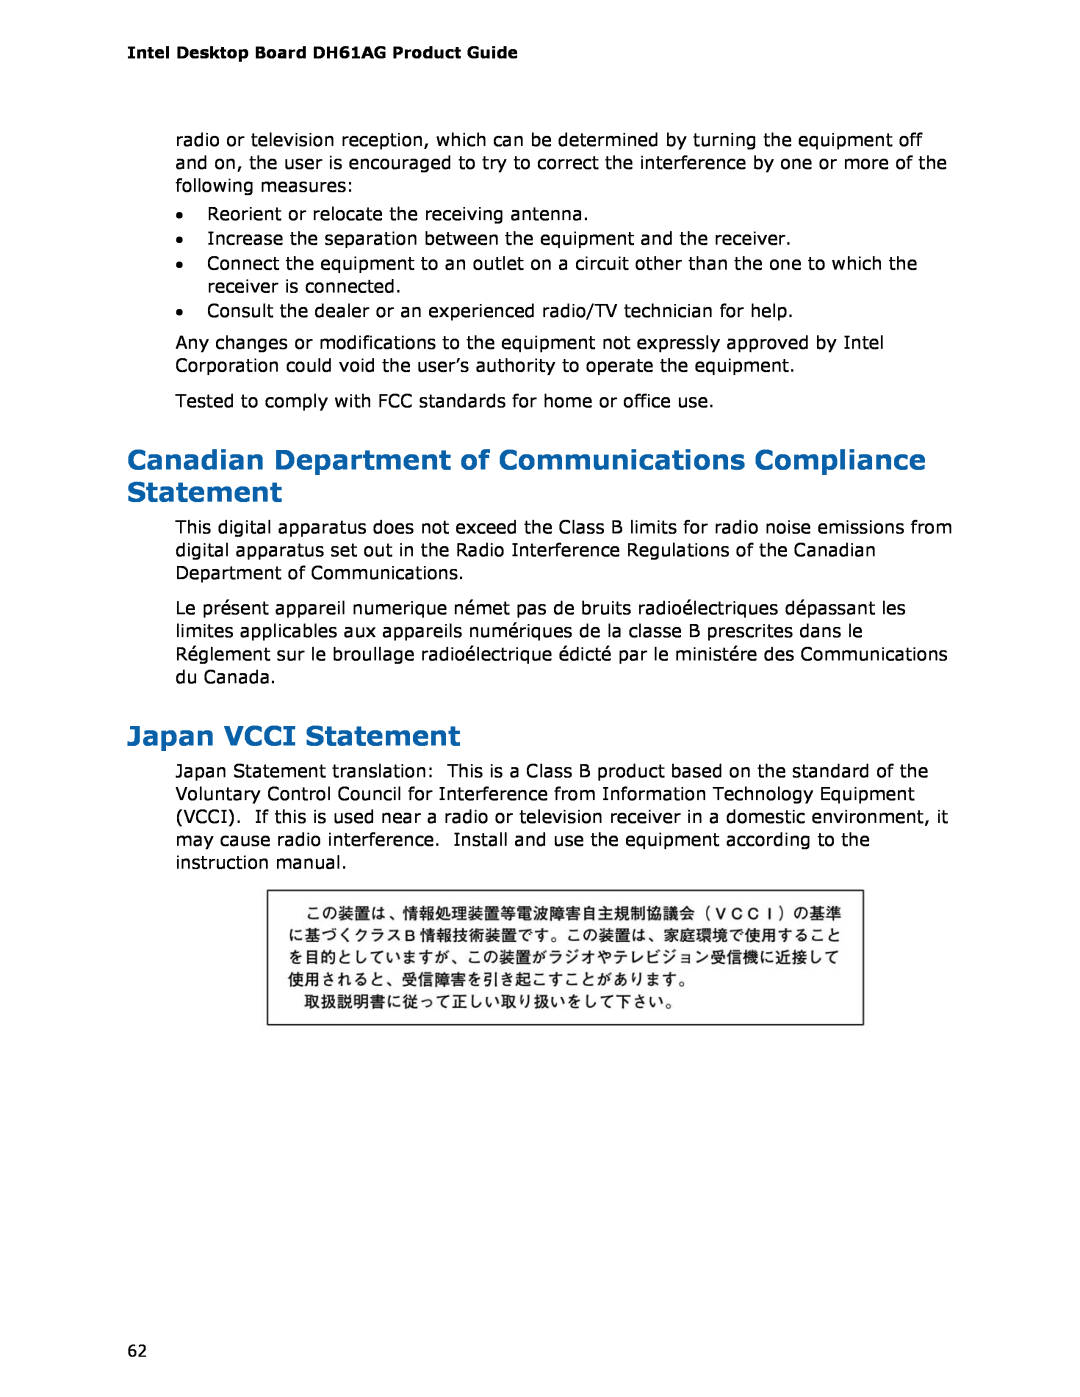 Intel BOXDH61AG manual Canadian Department of Communications Compliance Statement, Japan VCCI Statement 